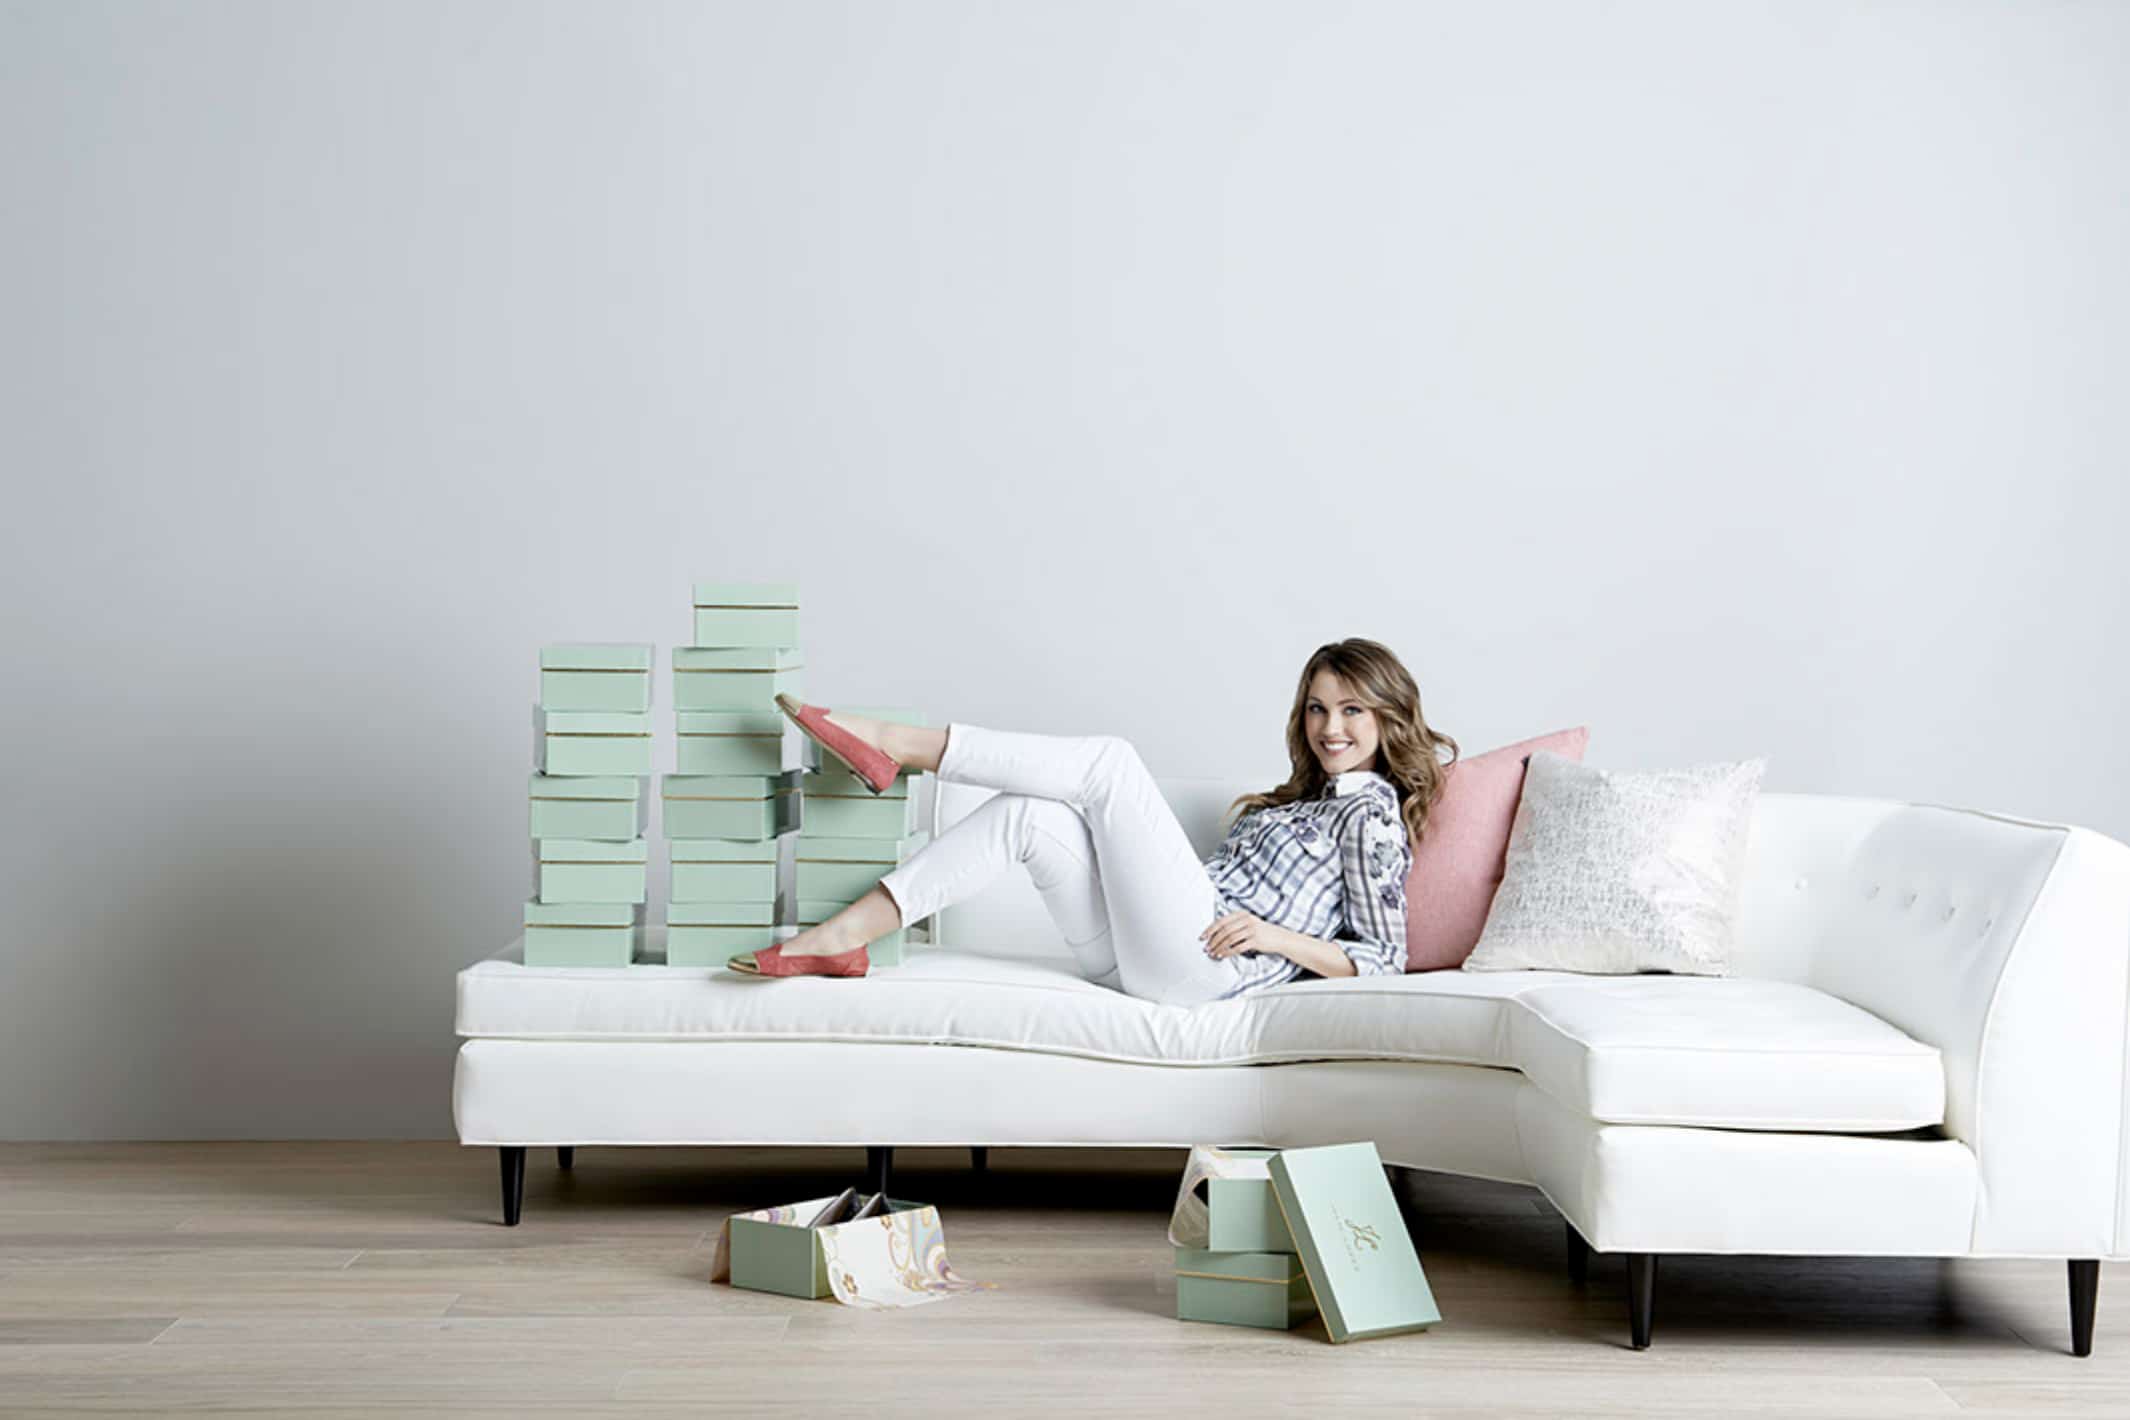 WO_Woman-Shoes-White Sectional